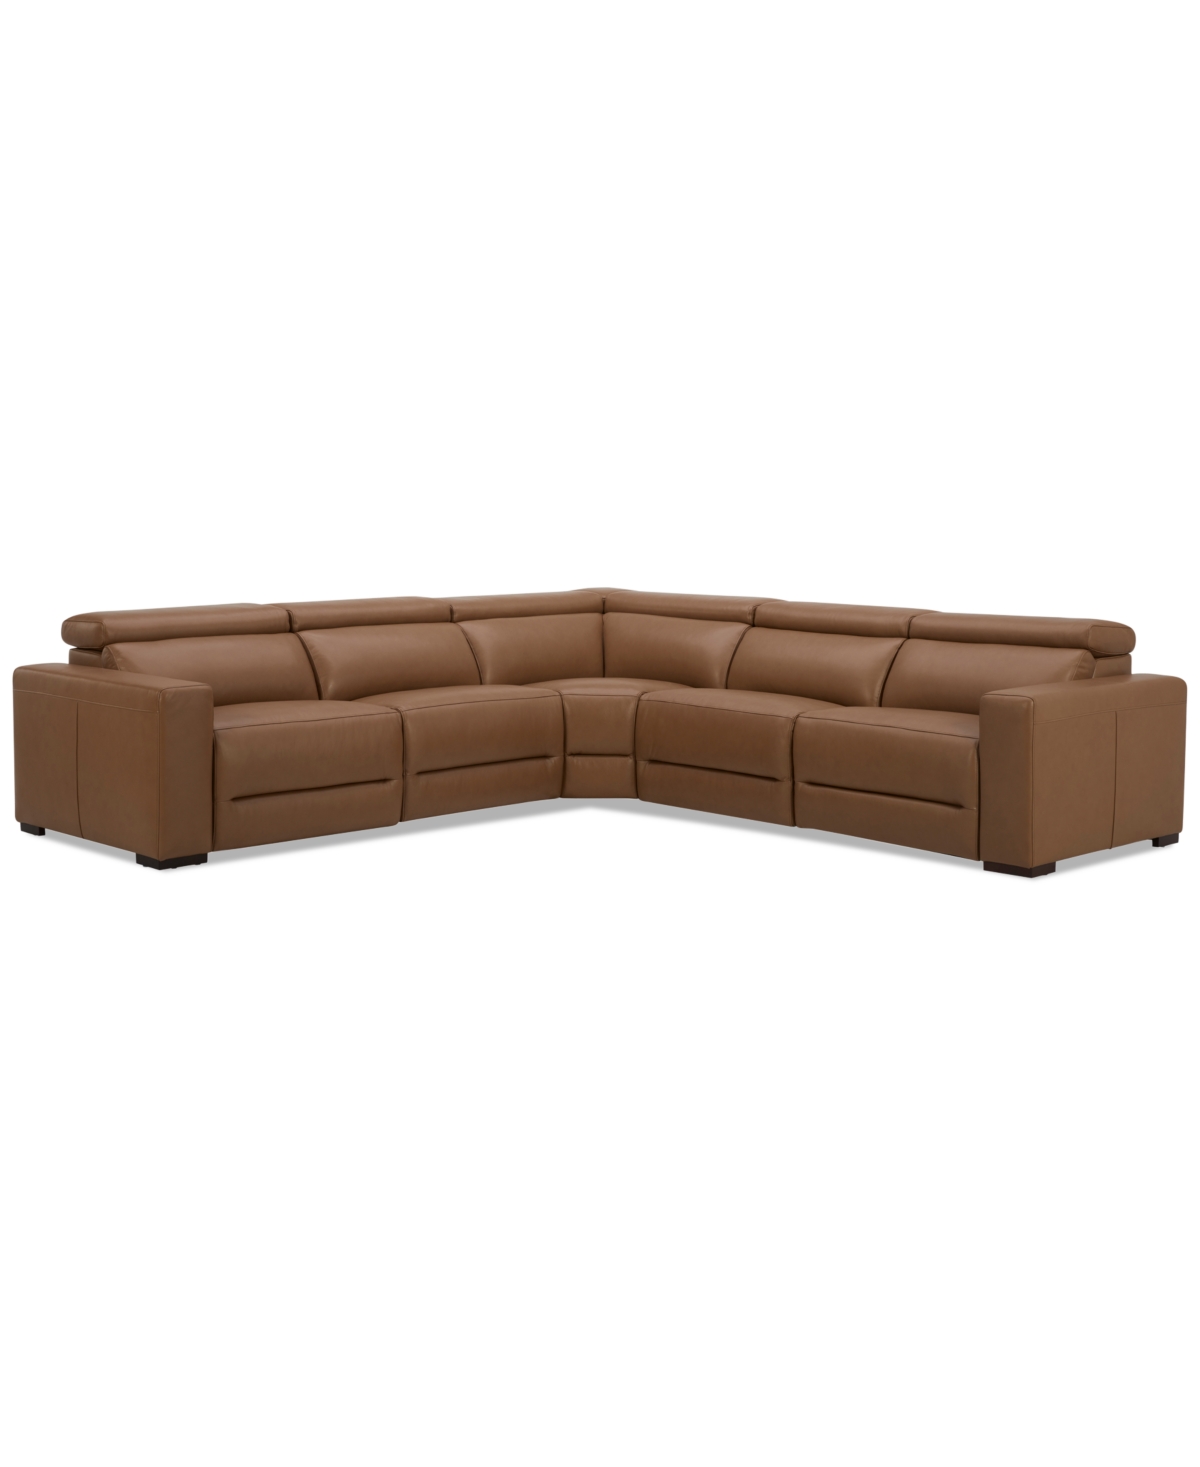 Macy's Nevio 124" 5-pc. Leather Sectional With 2 Power Recliners And Headrests, Created For  In Butternut